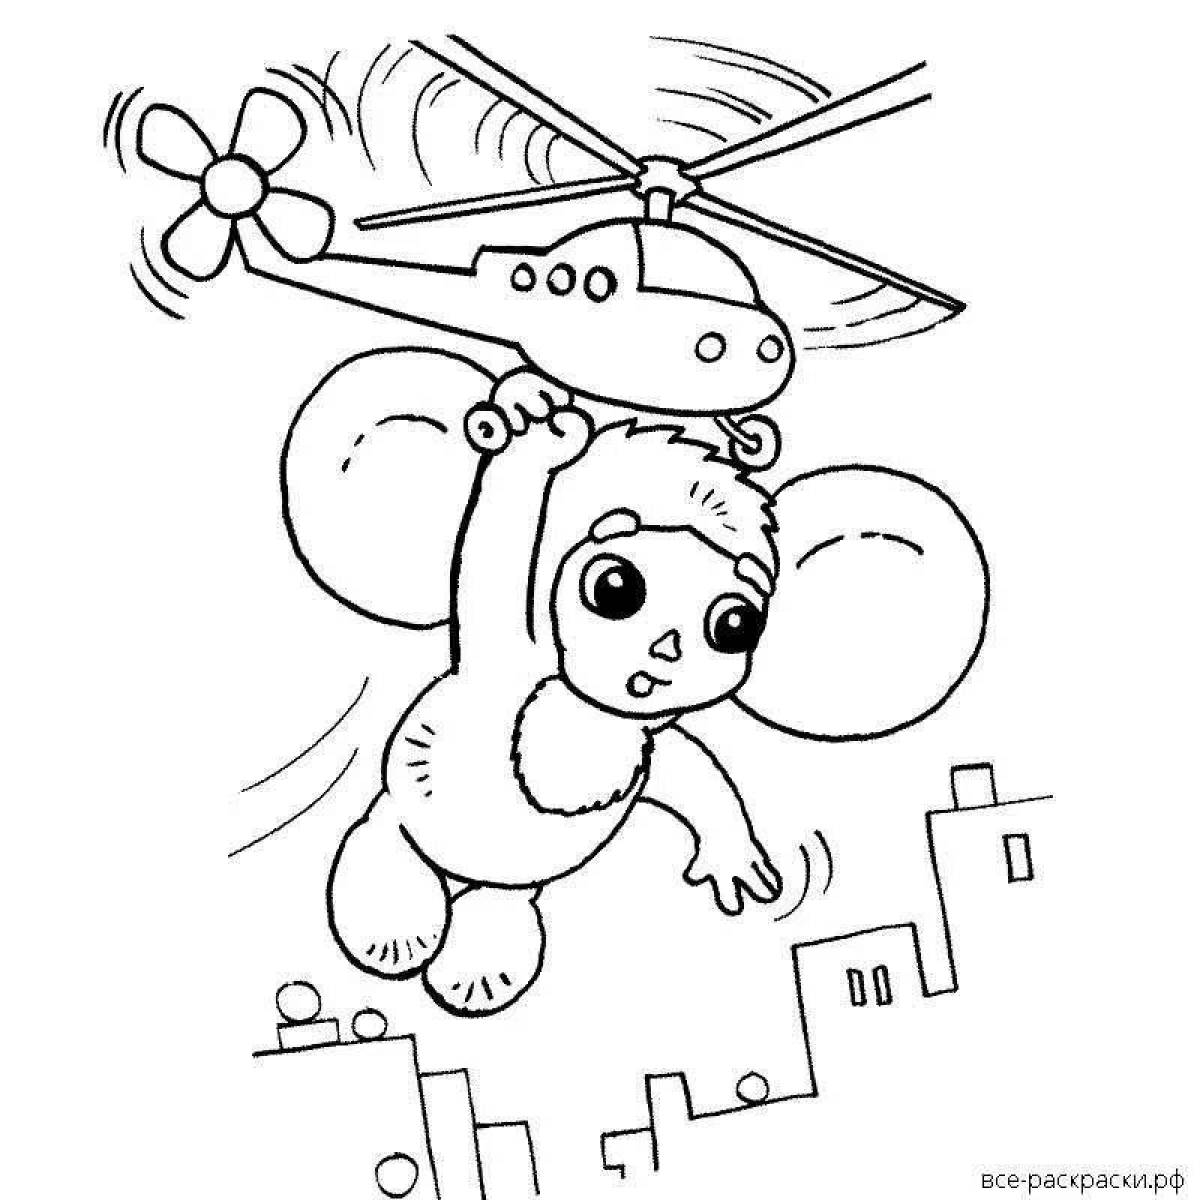 Charming Cheburashka coloring book for children 4-5 years old